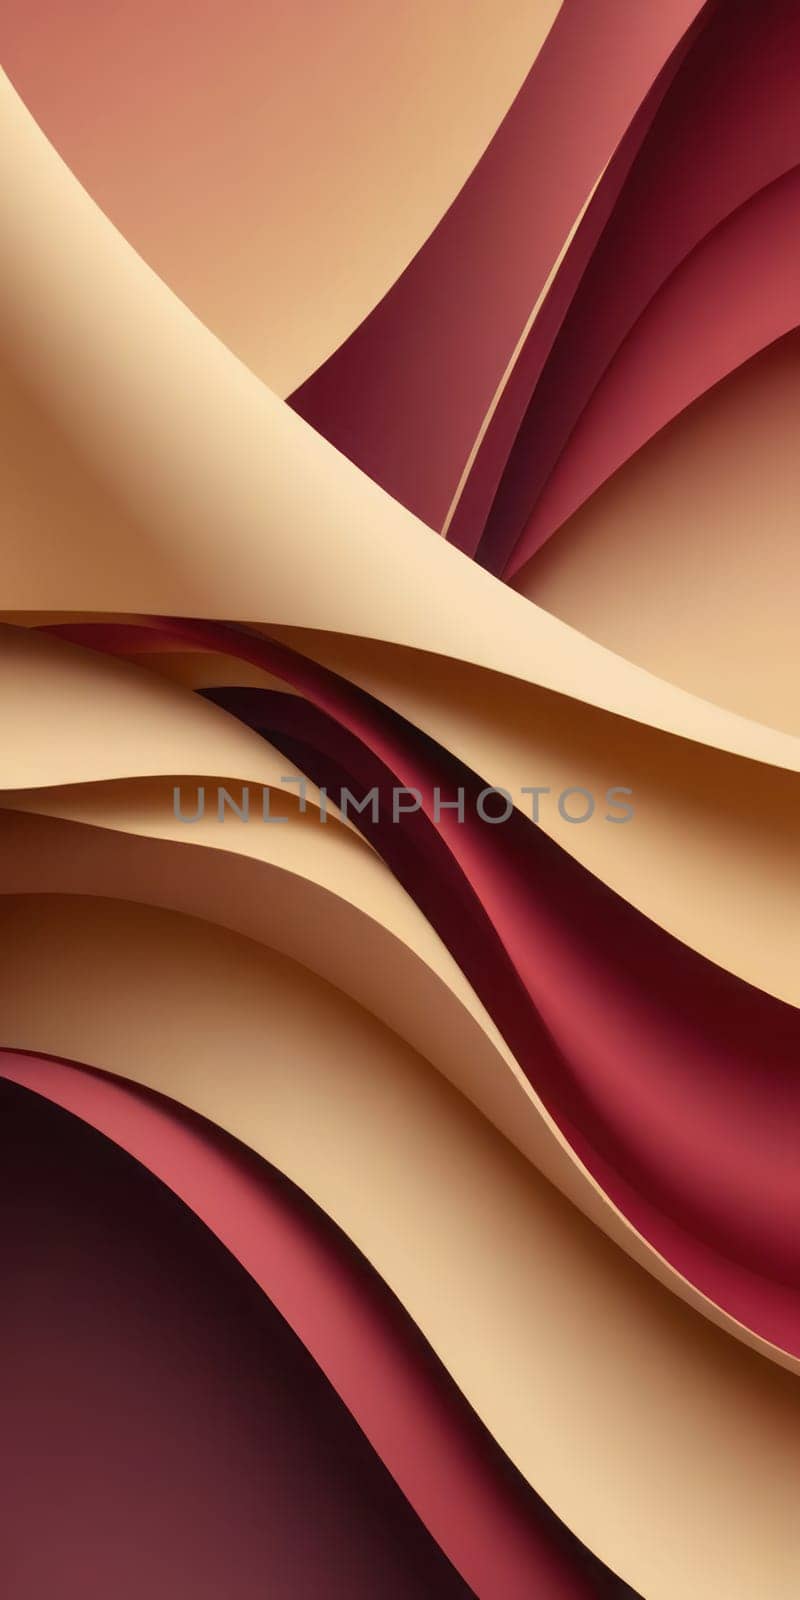 Sculpted Shapes in Maroon and Khaki by nkotlyar